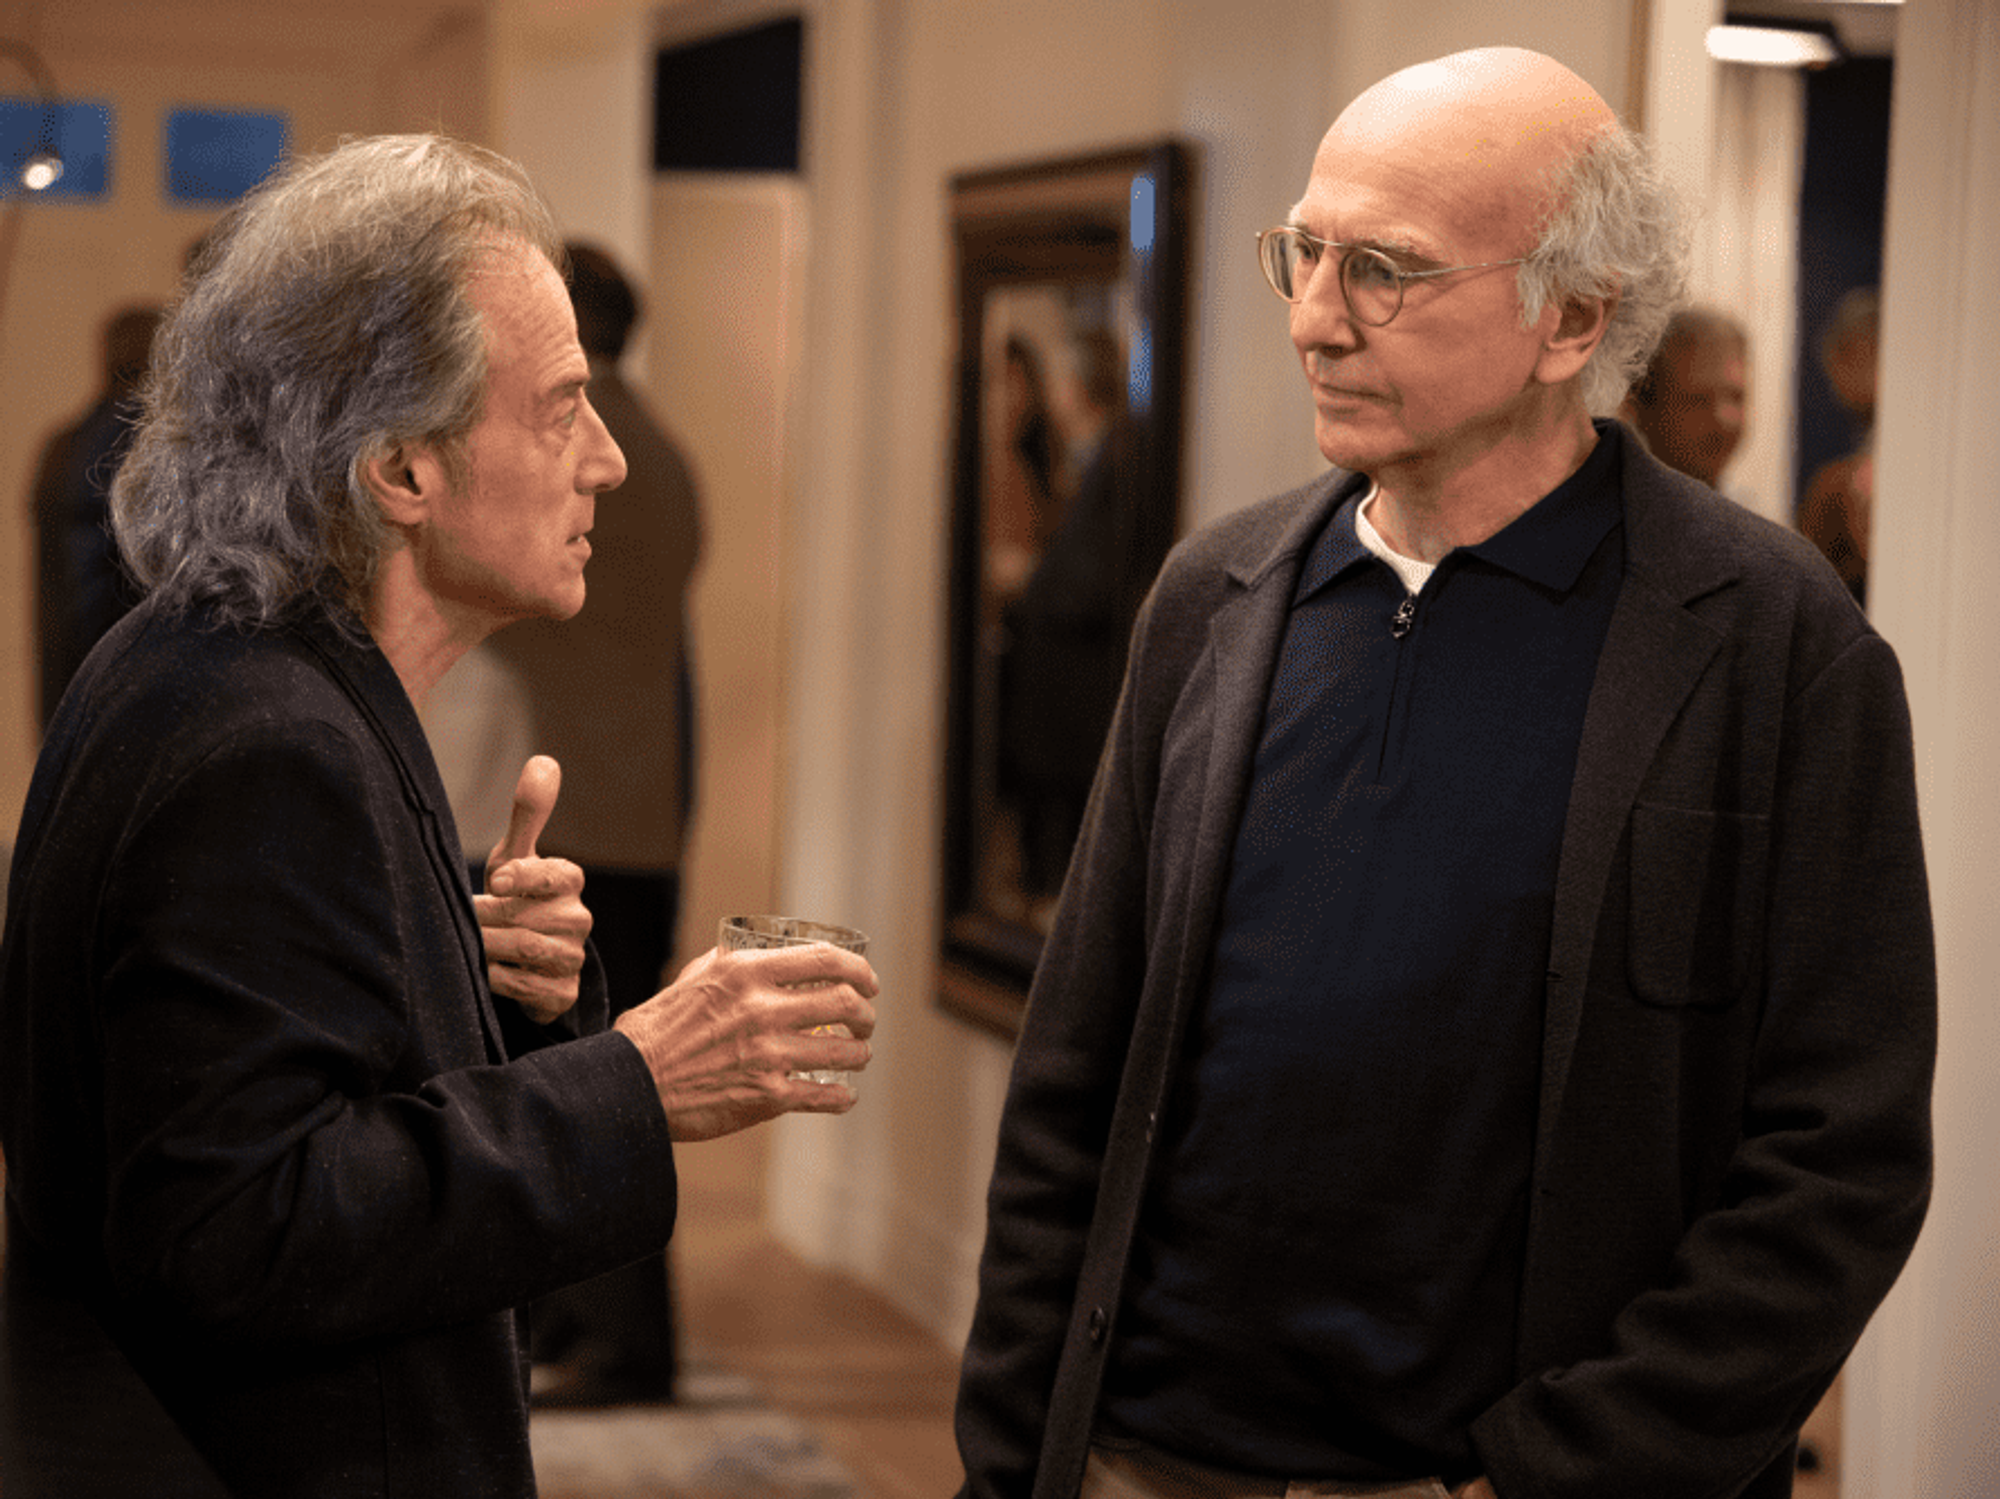 Richard Lewis is the subject of Larry David's vitriol in Curb's new season.